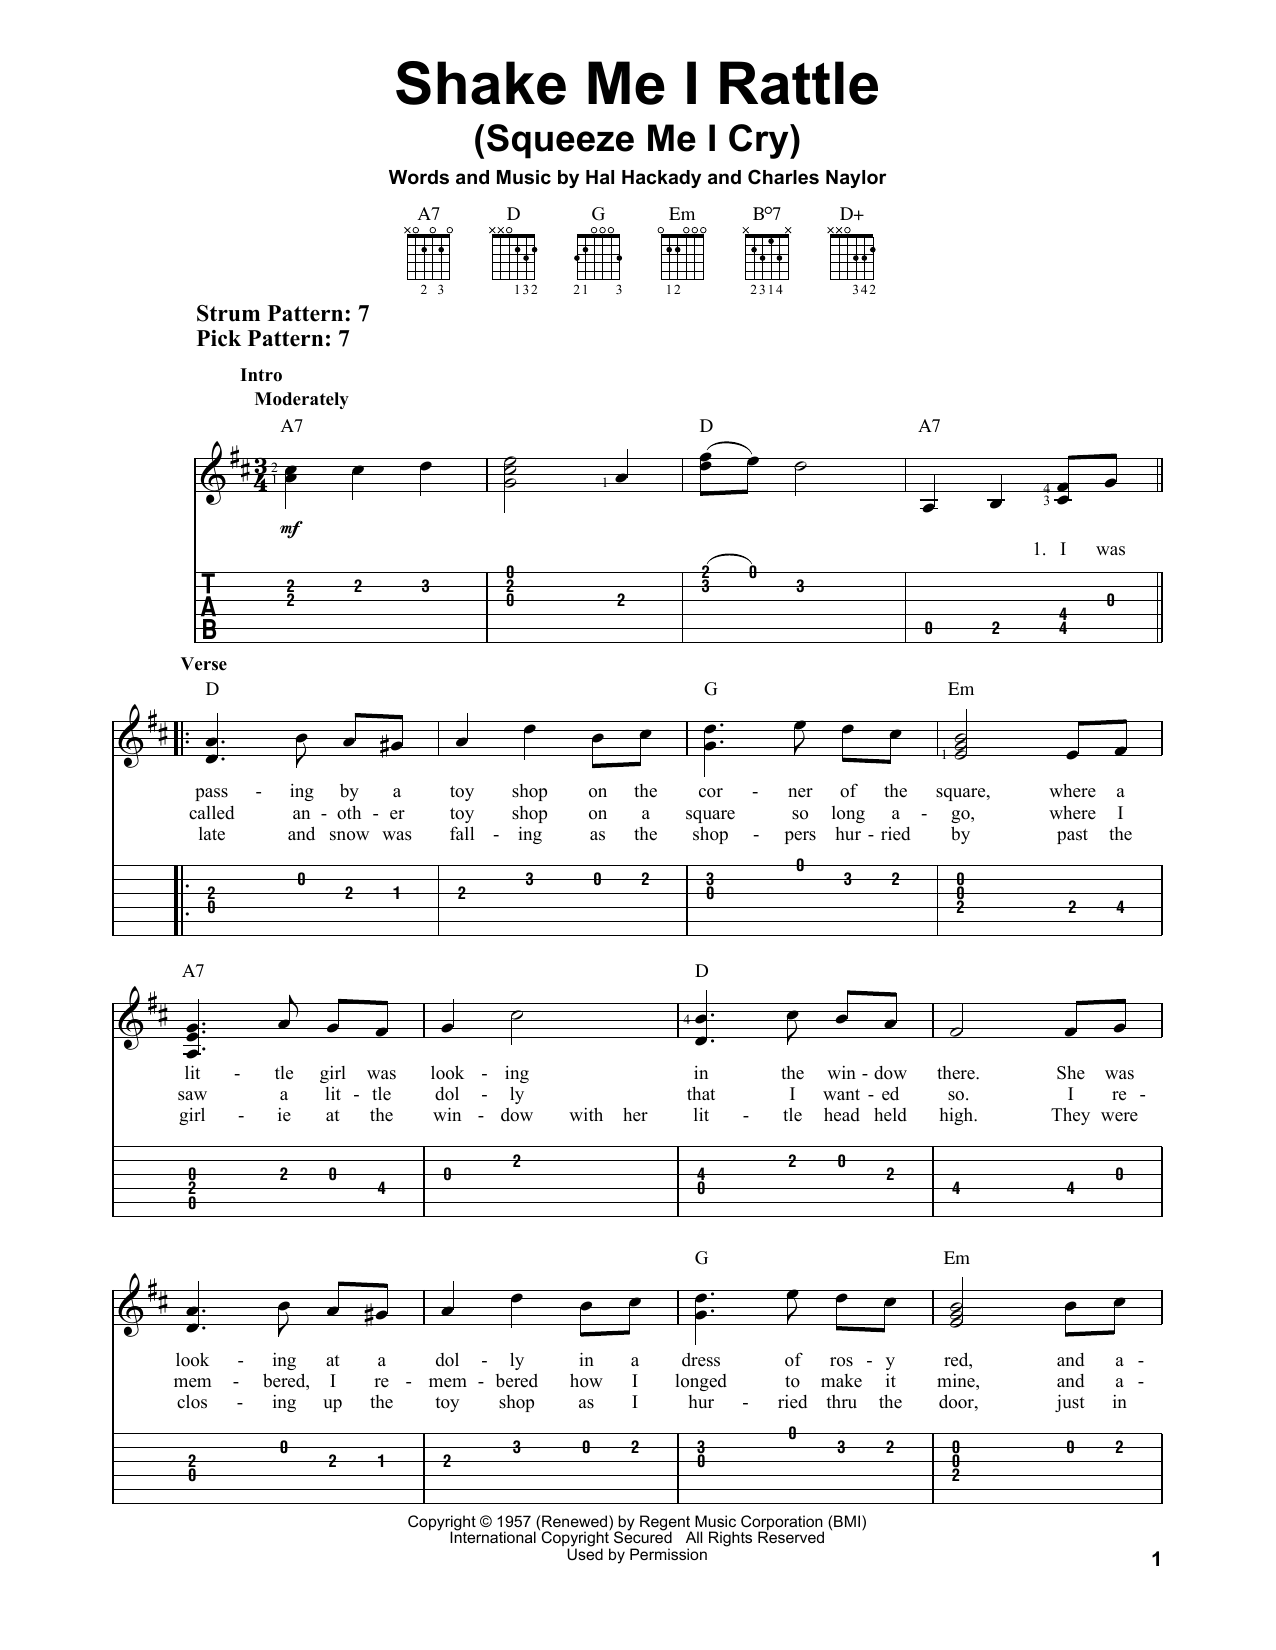 Download Charles Naylor Shake Me I Rattle (Squeeze Me I Cry) Sheet Music